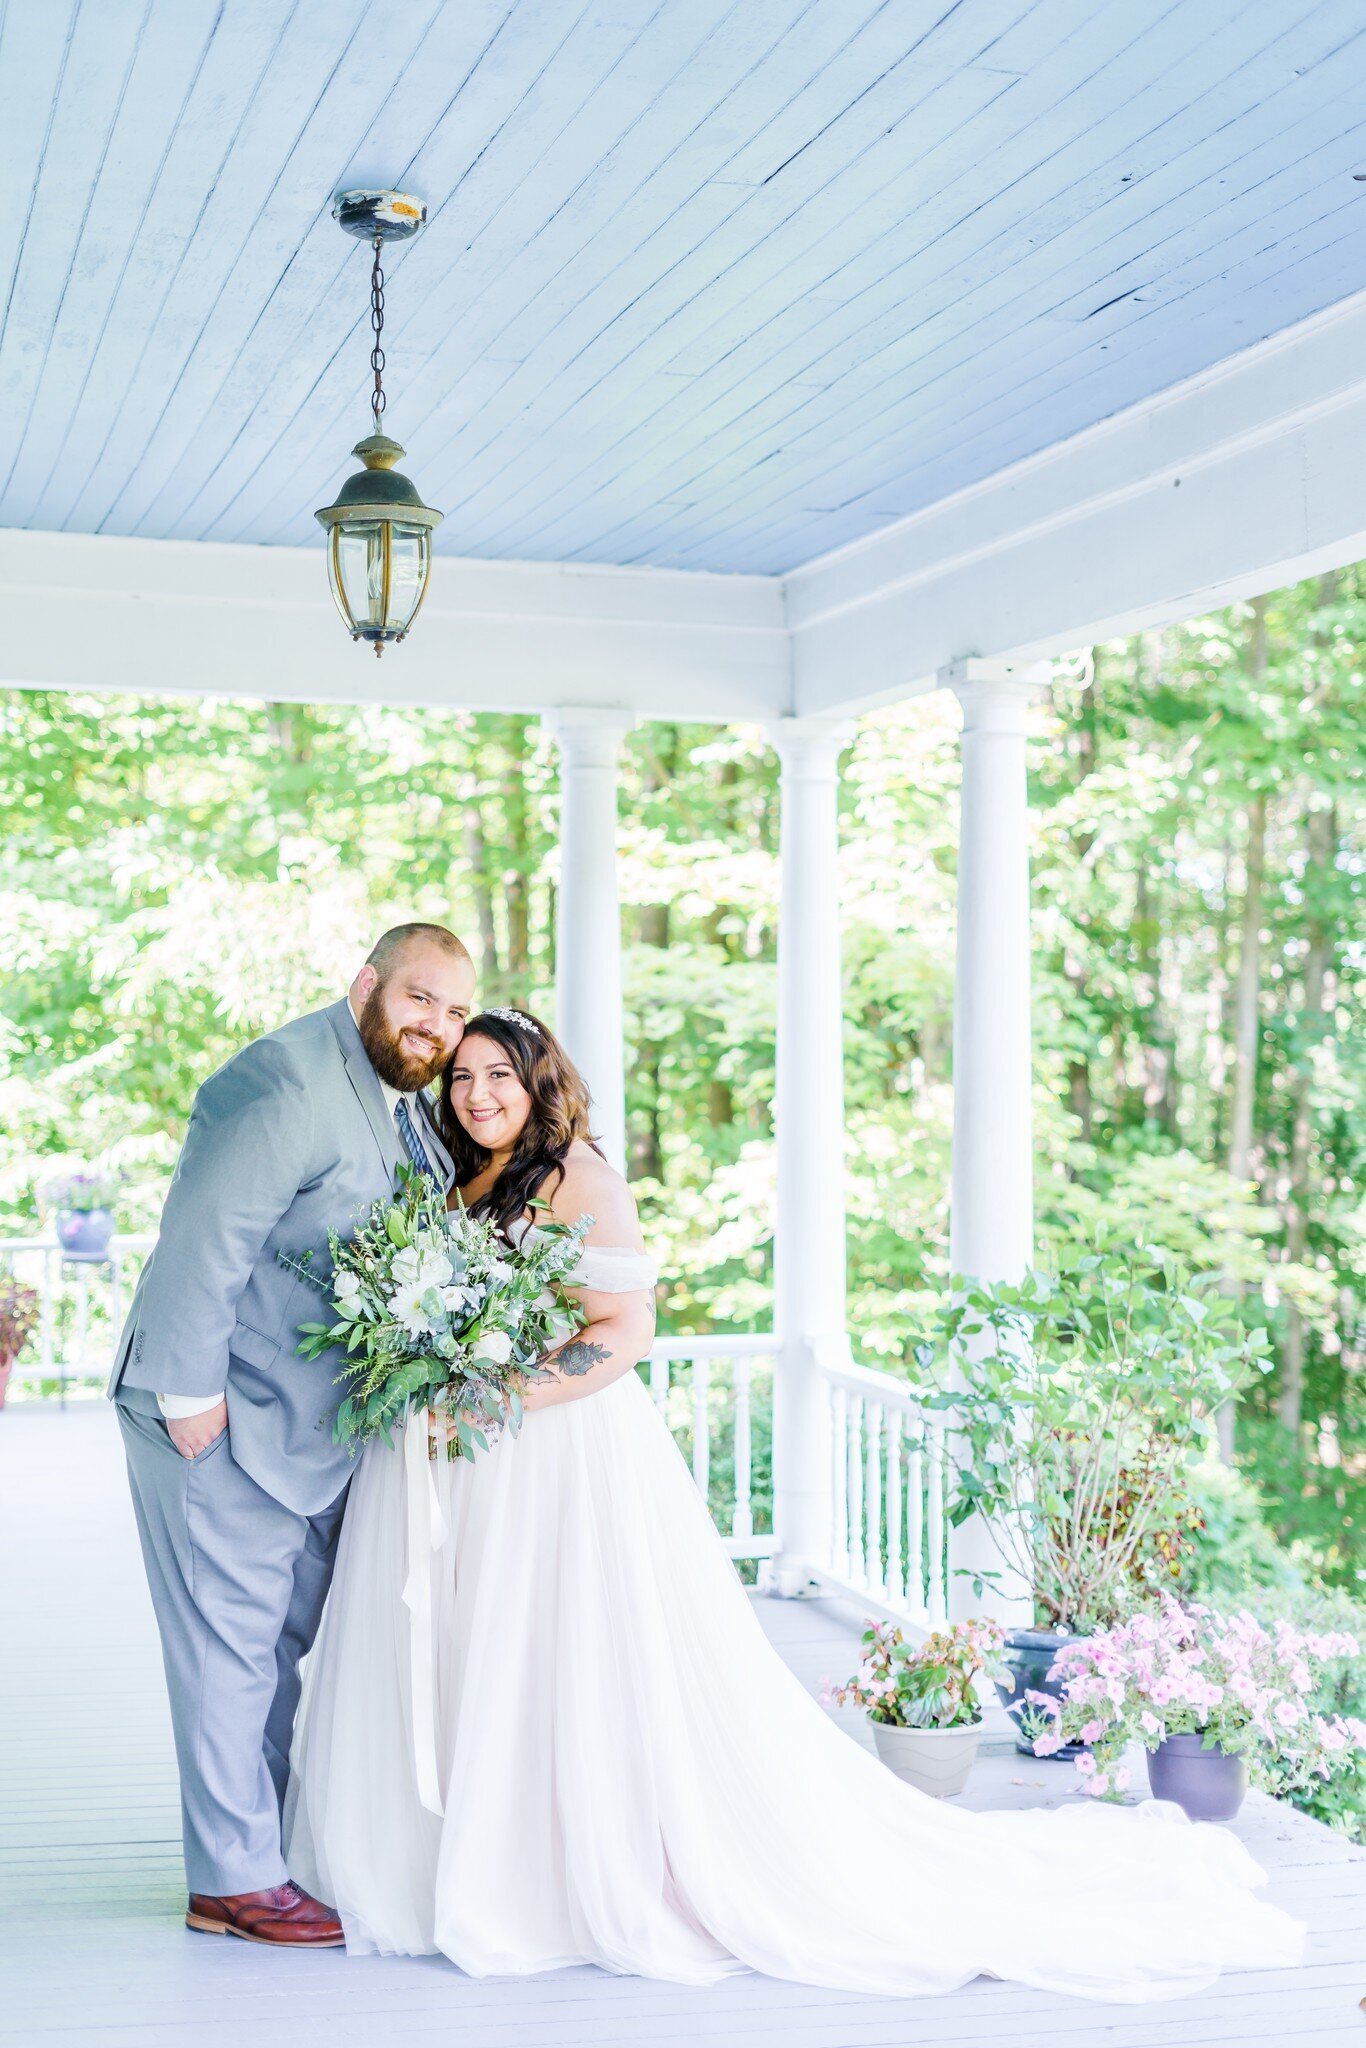 New England bride and groom with colorful bouquet